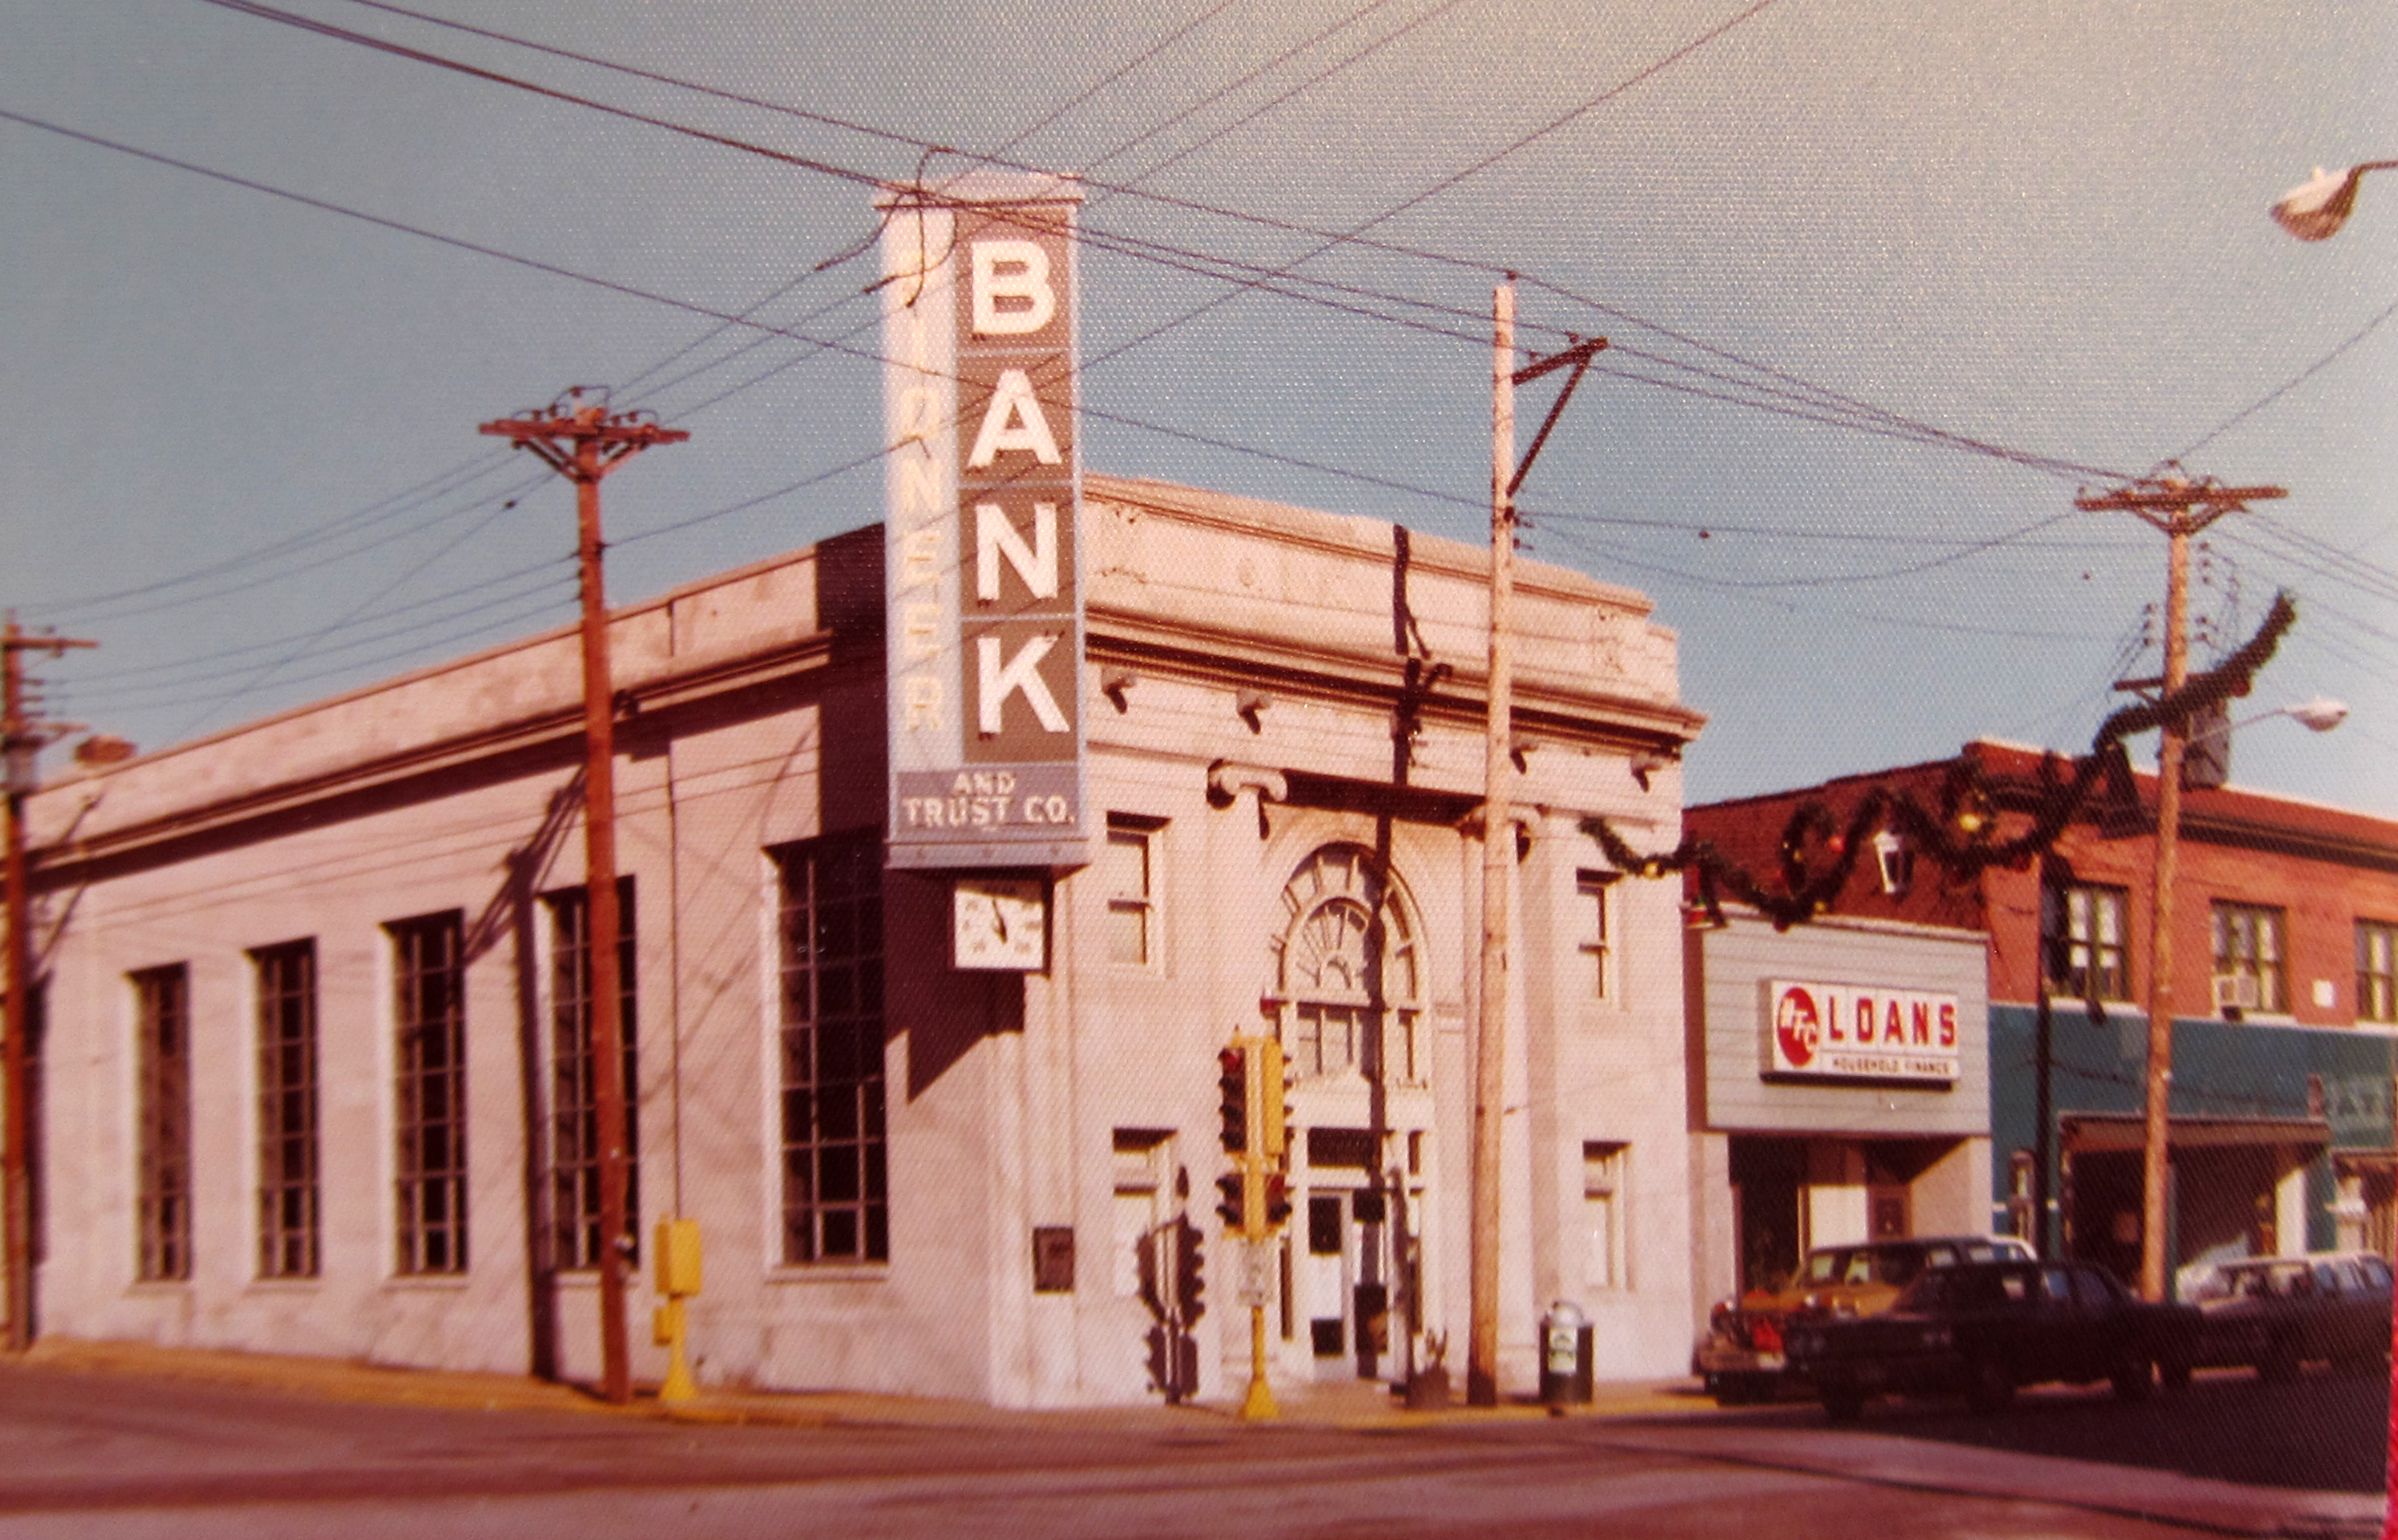 Maplewood History: The Bank of Maplewood-Part 3 (continued)